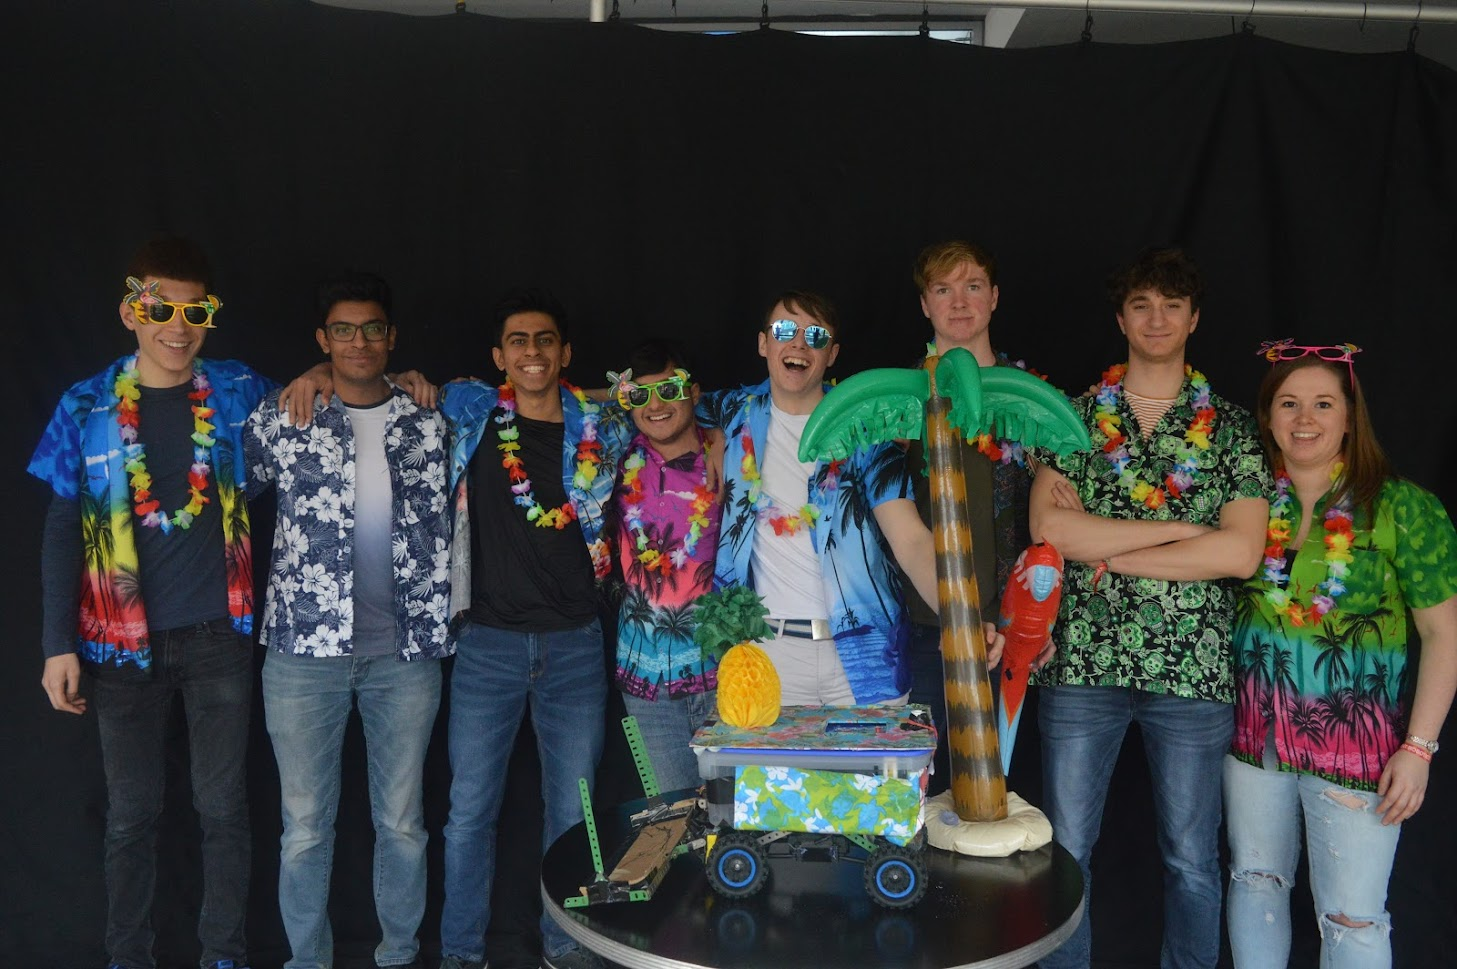  2019 - HAB: Haberdashers’ Aske’s Boys’ School won the Robot and Team
Image award with their Hawaiian theme. This was complimented with inflatable
palm trees and a 3D paper pineapple on top of their robot.